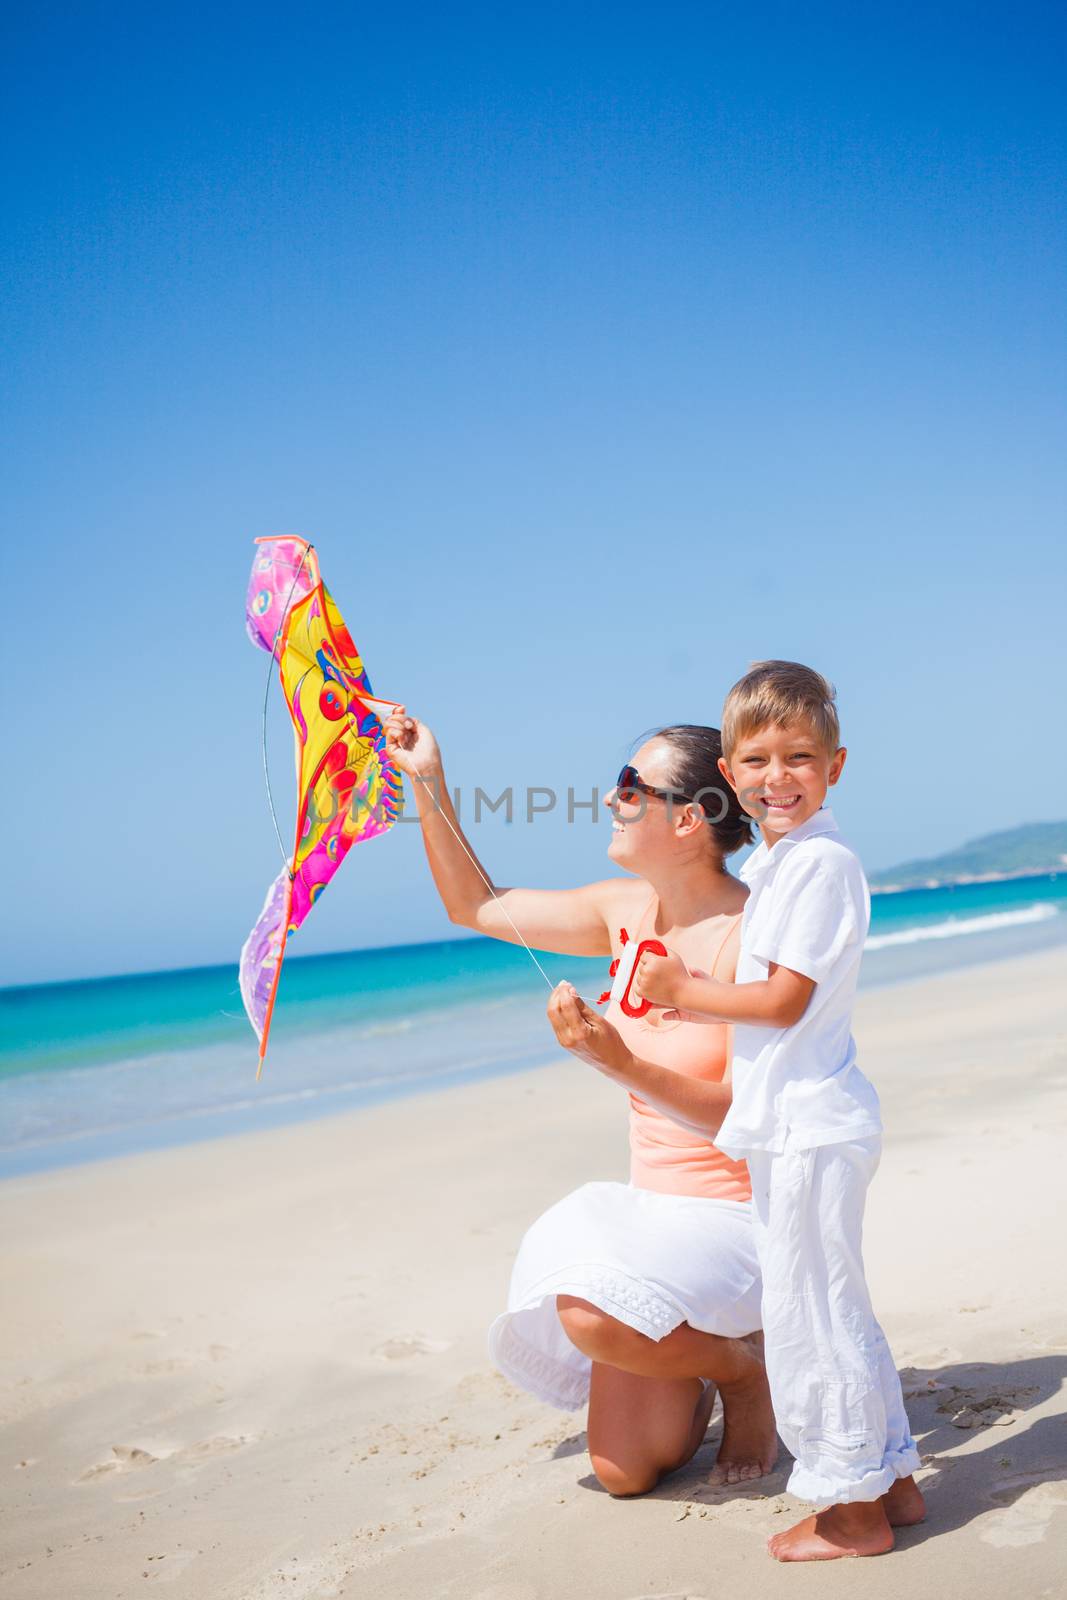 Boy with his mother flying kite by maxoliki